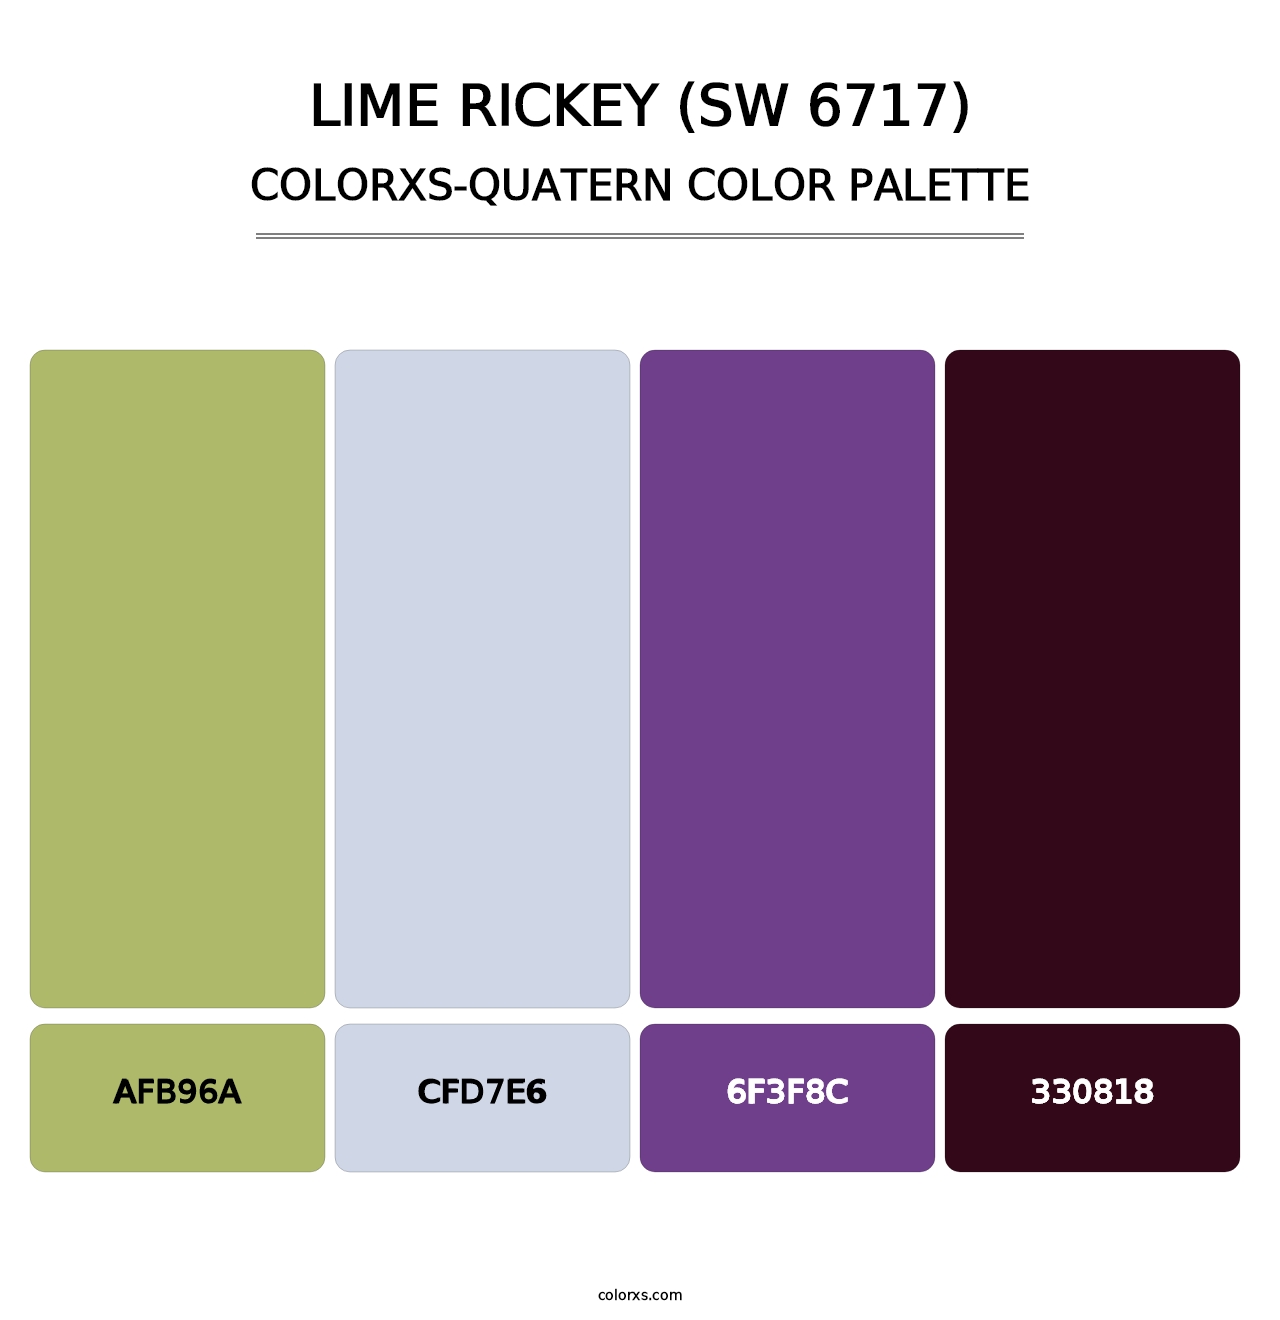 Lime Rickey (SW 6717) - Colorxs Quatern Palette